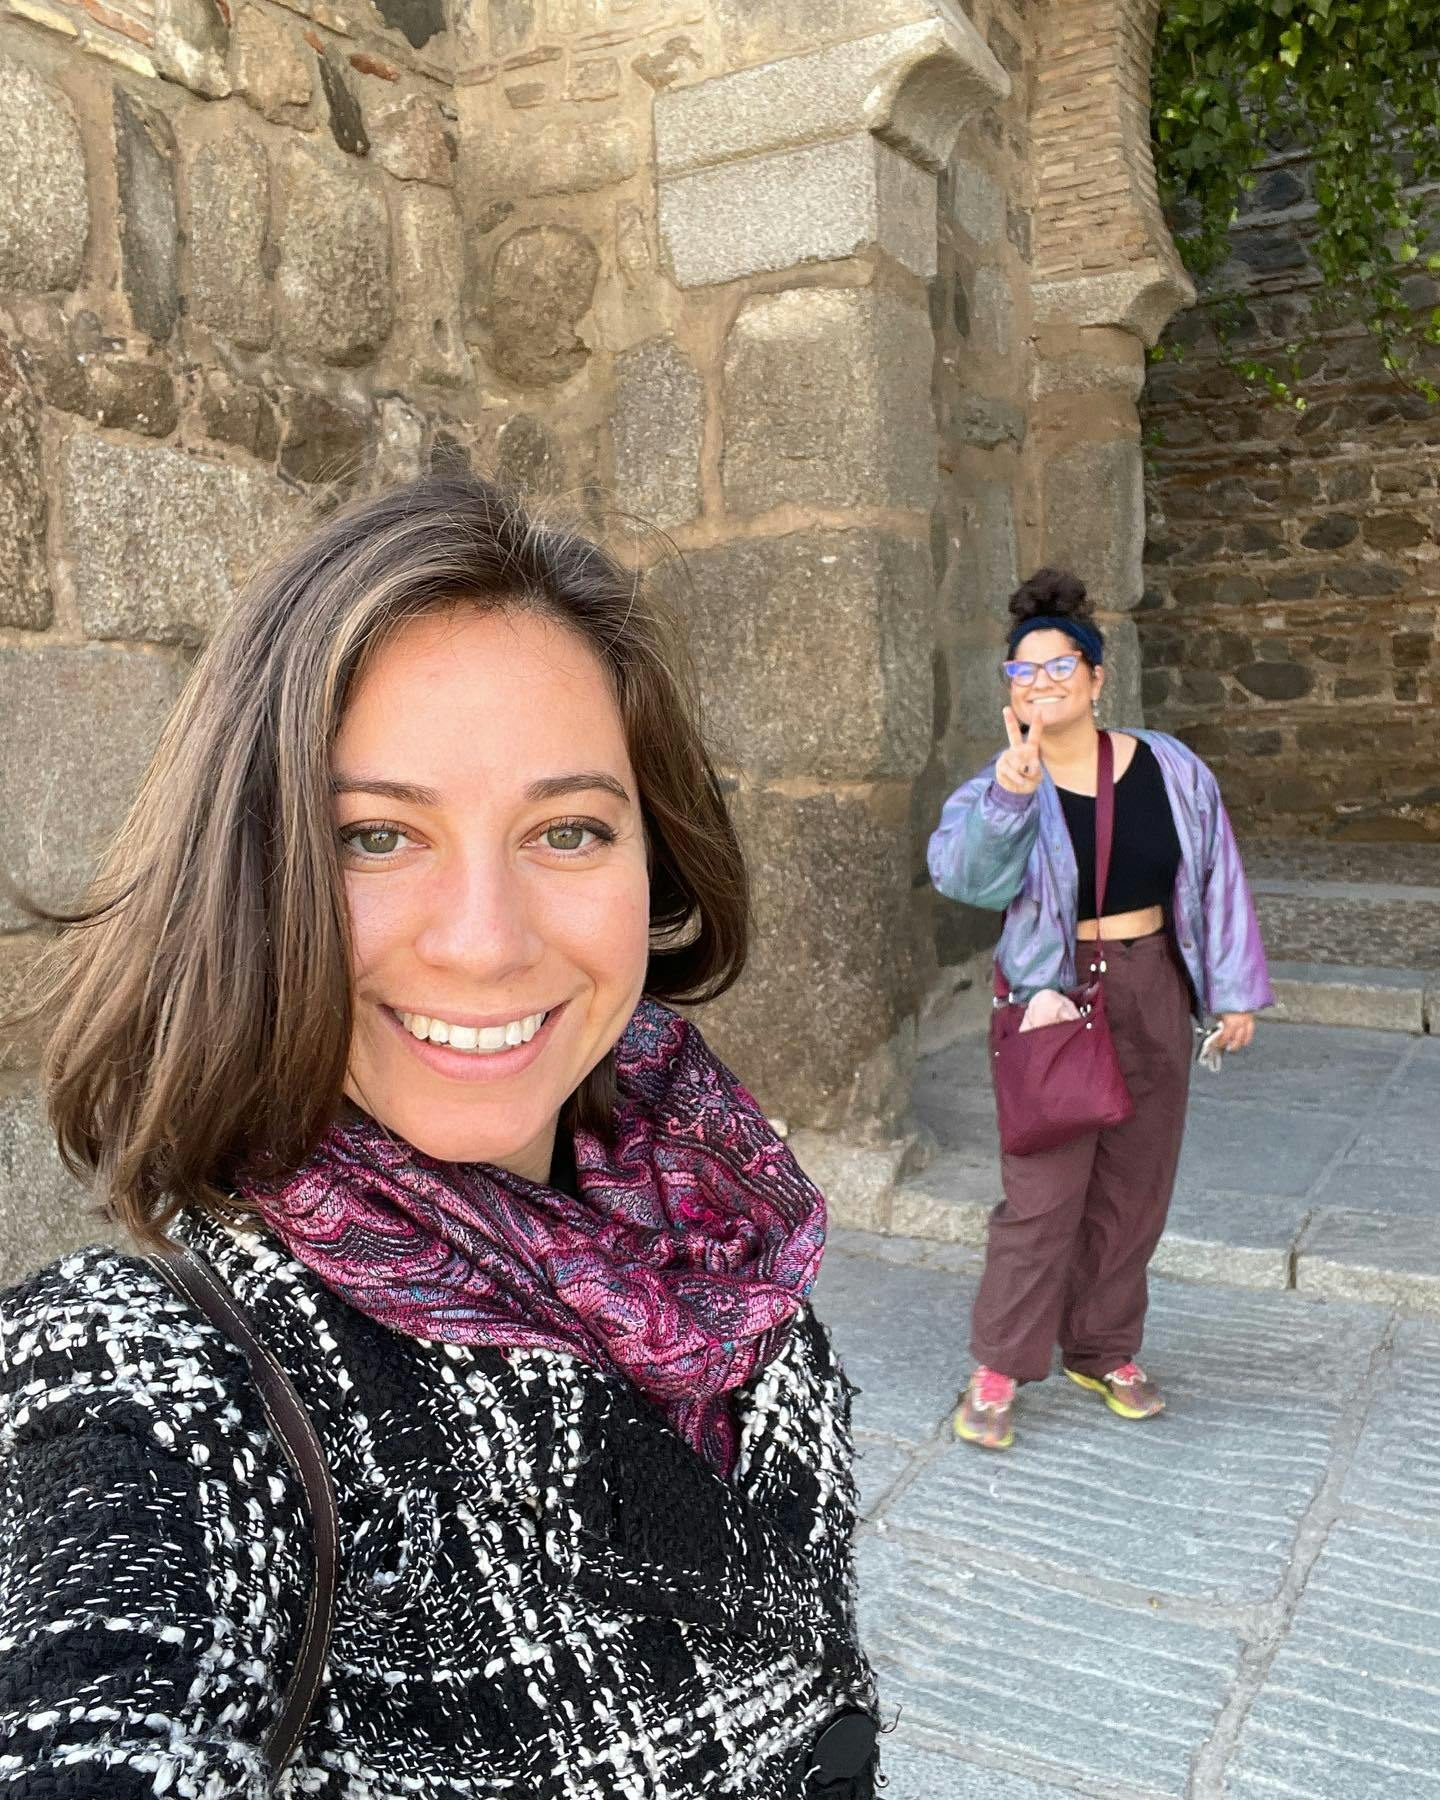 Posting photos from my second to last adventure with my long time pal Julia …before our next adventure, which is coming soon!

Shots from Madrid and the magical city of Toledo 😍

PS I bribed her to go to the biggest nightclub in Madrid with me and actually enjoyed it 😂